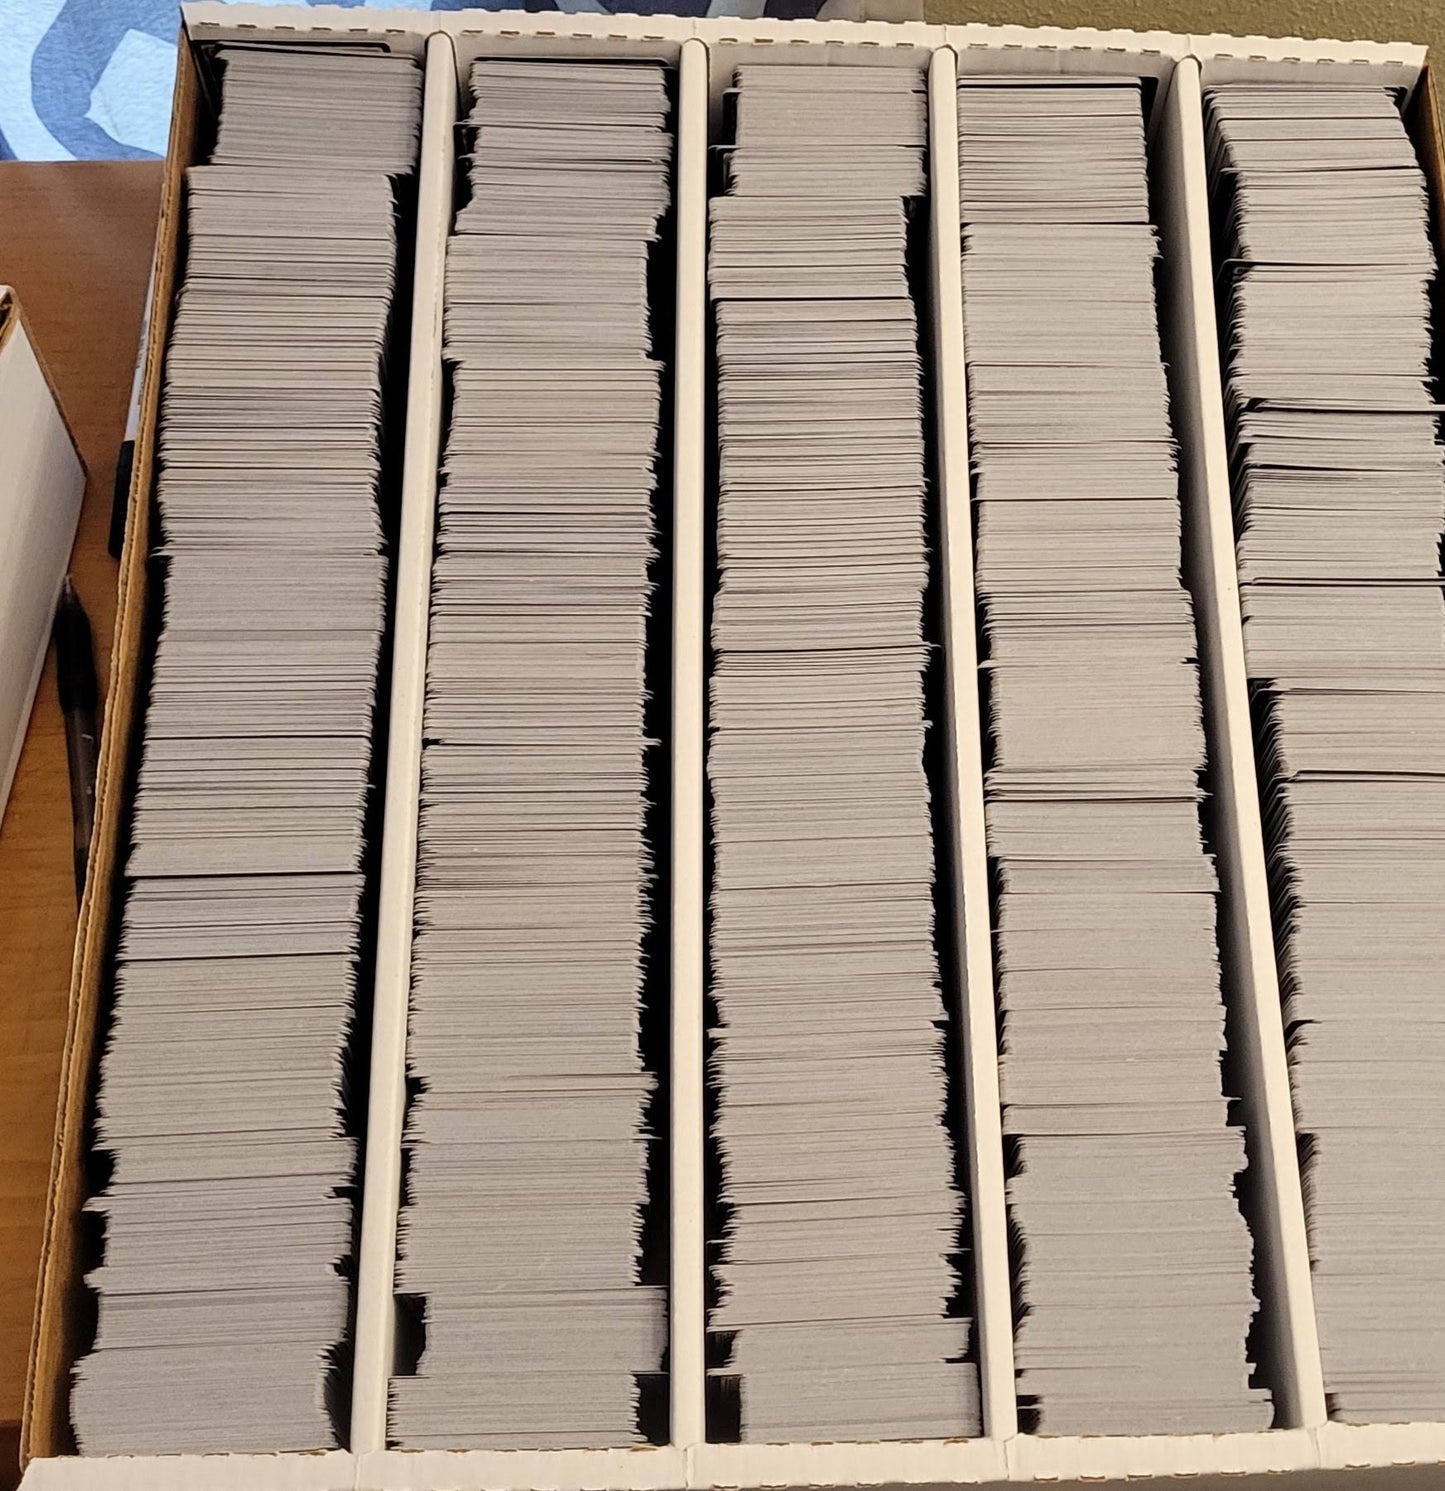 1000+ (1100!) Assorted Mtg Magic The Gathering Card Lot With Rares/Mythics From Huge Collection - This Is The Big Lot!